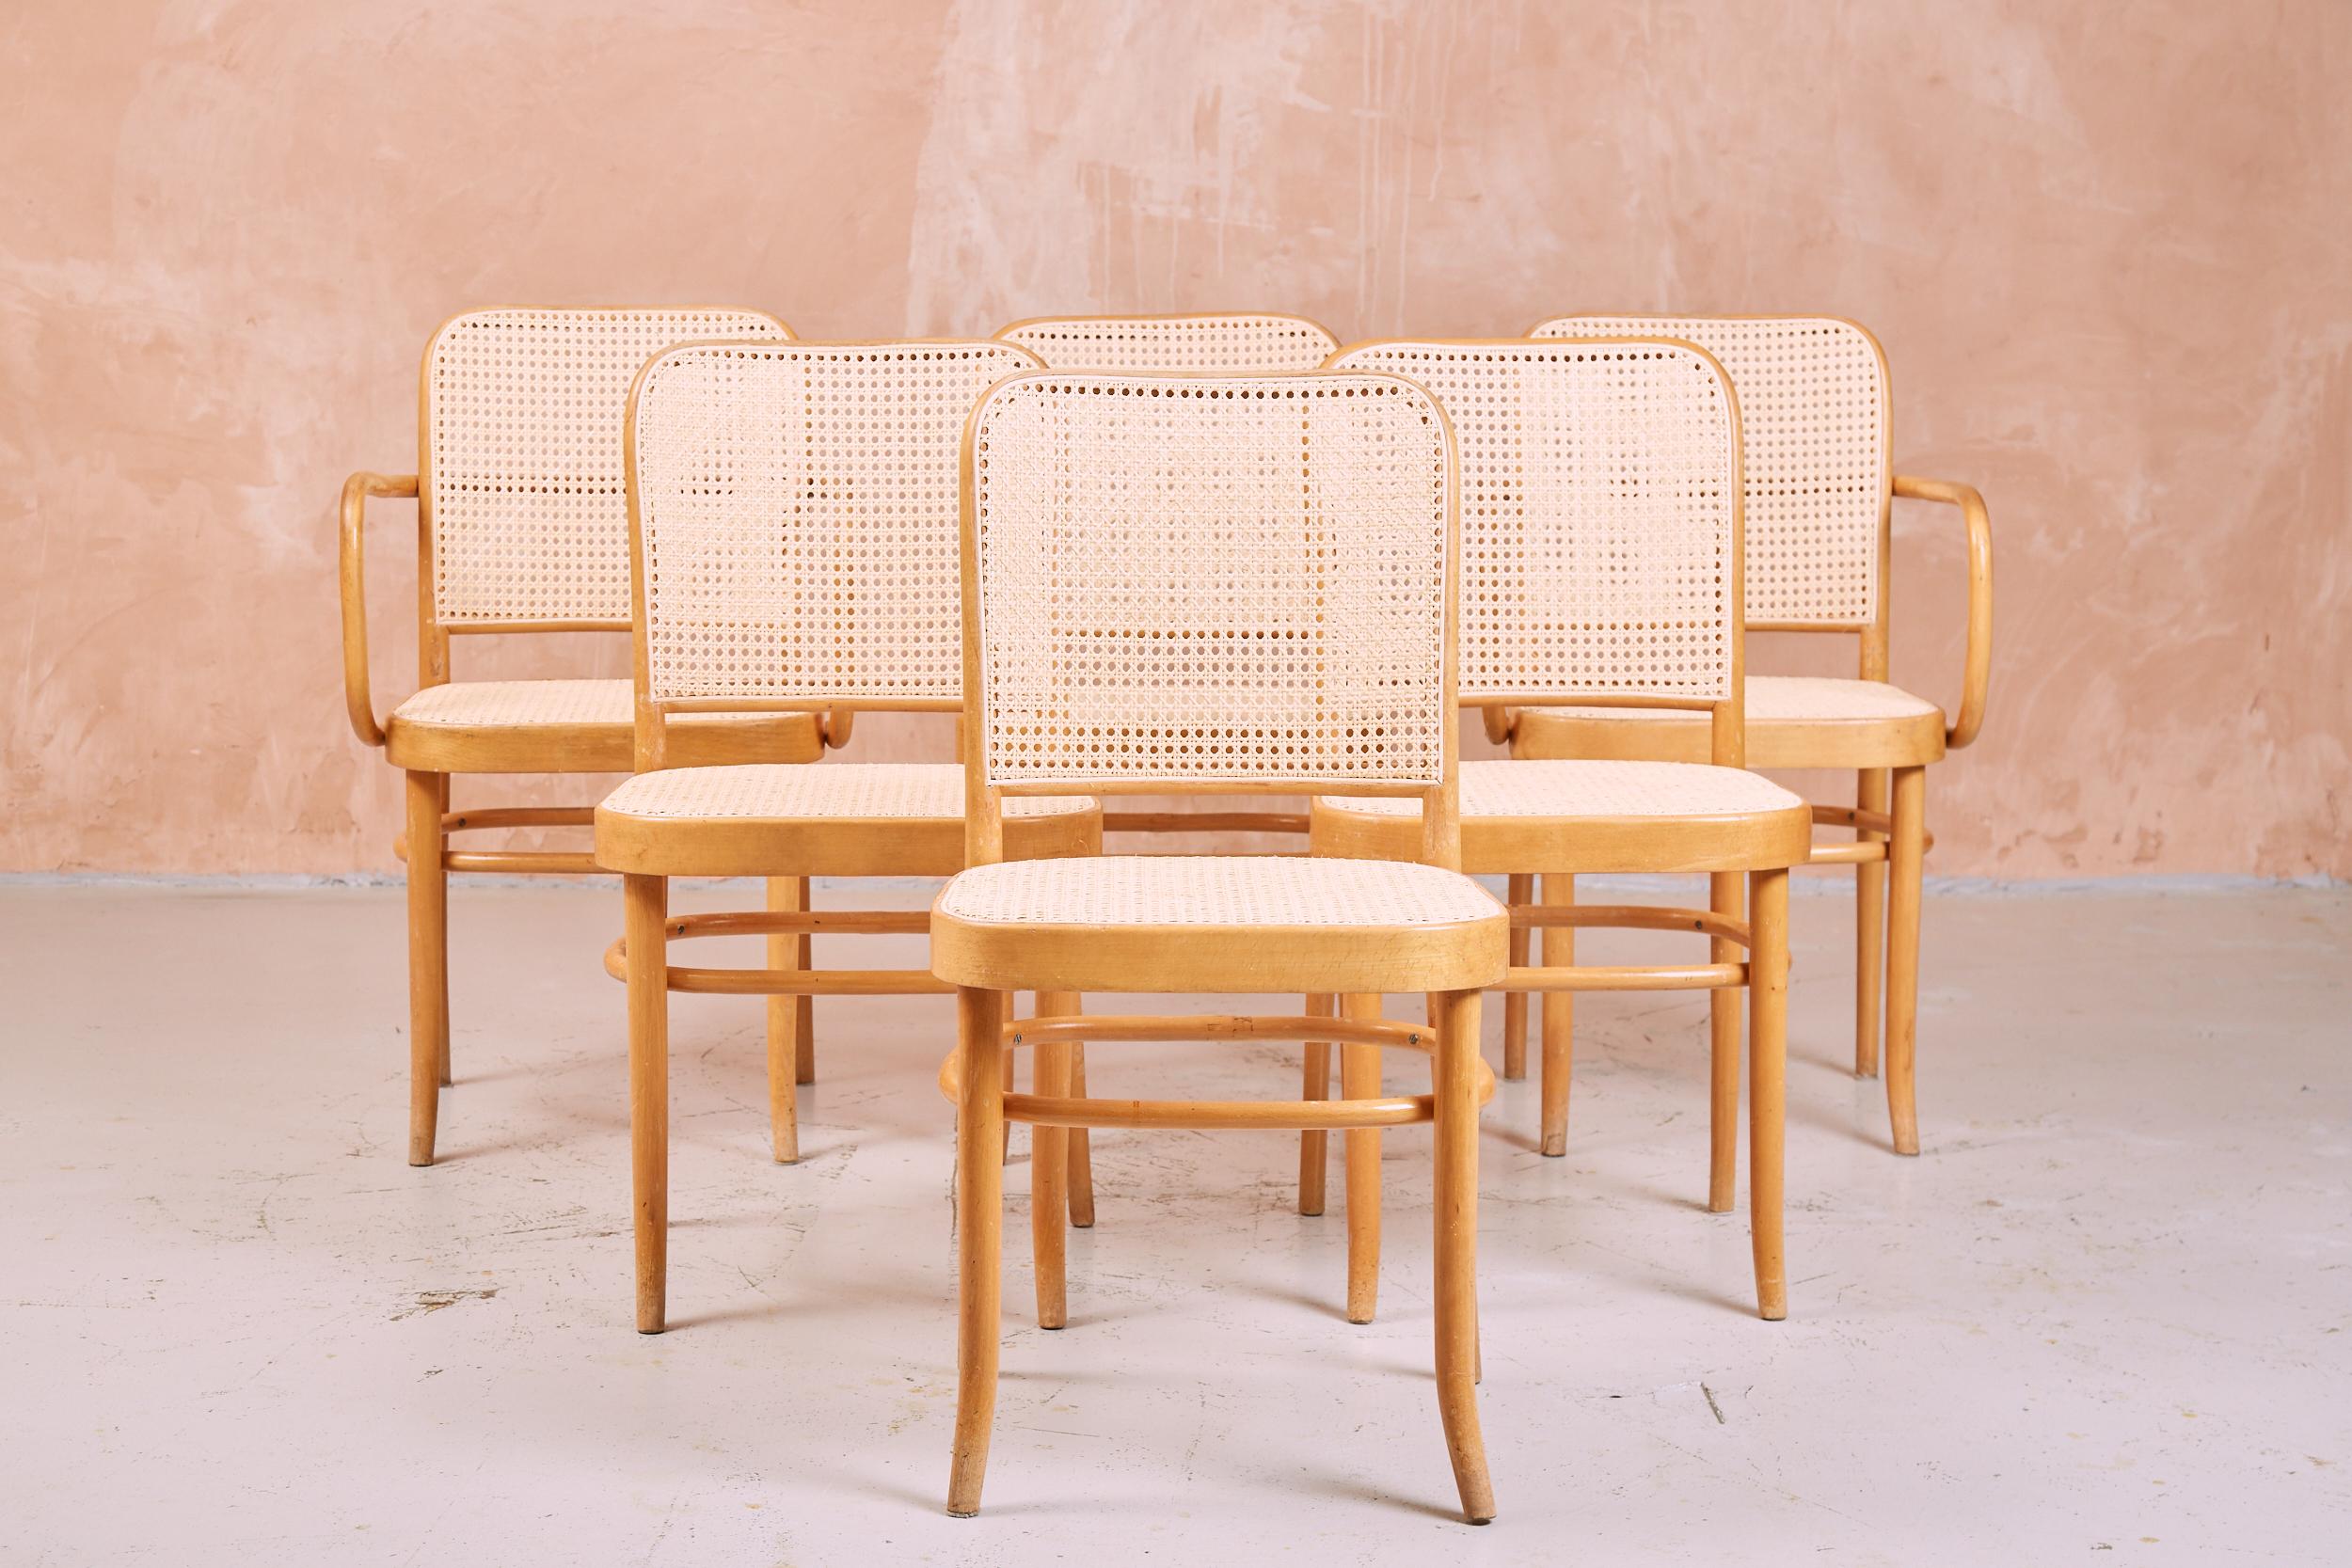 Austrian Prague Chairs by Josef Hoffmann & Frank in Bentwood and Cane, Set of Six, 1930s For Sale